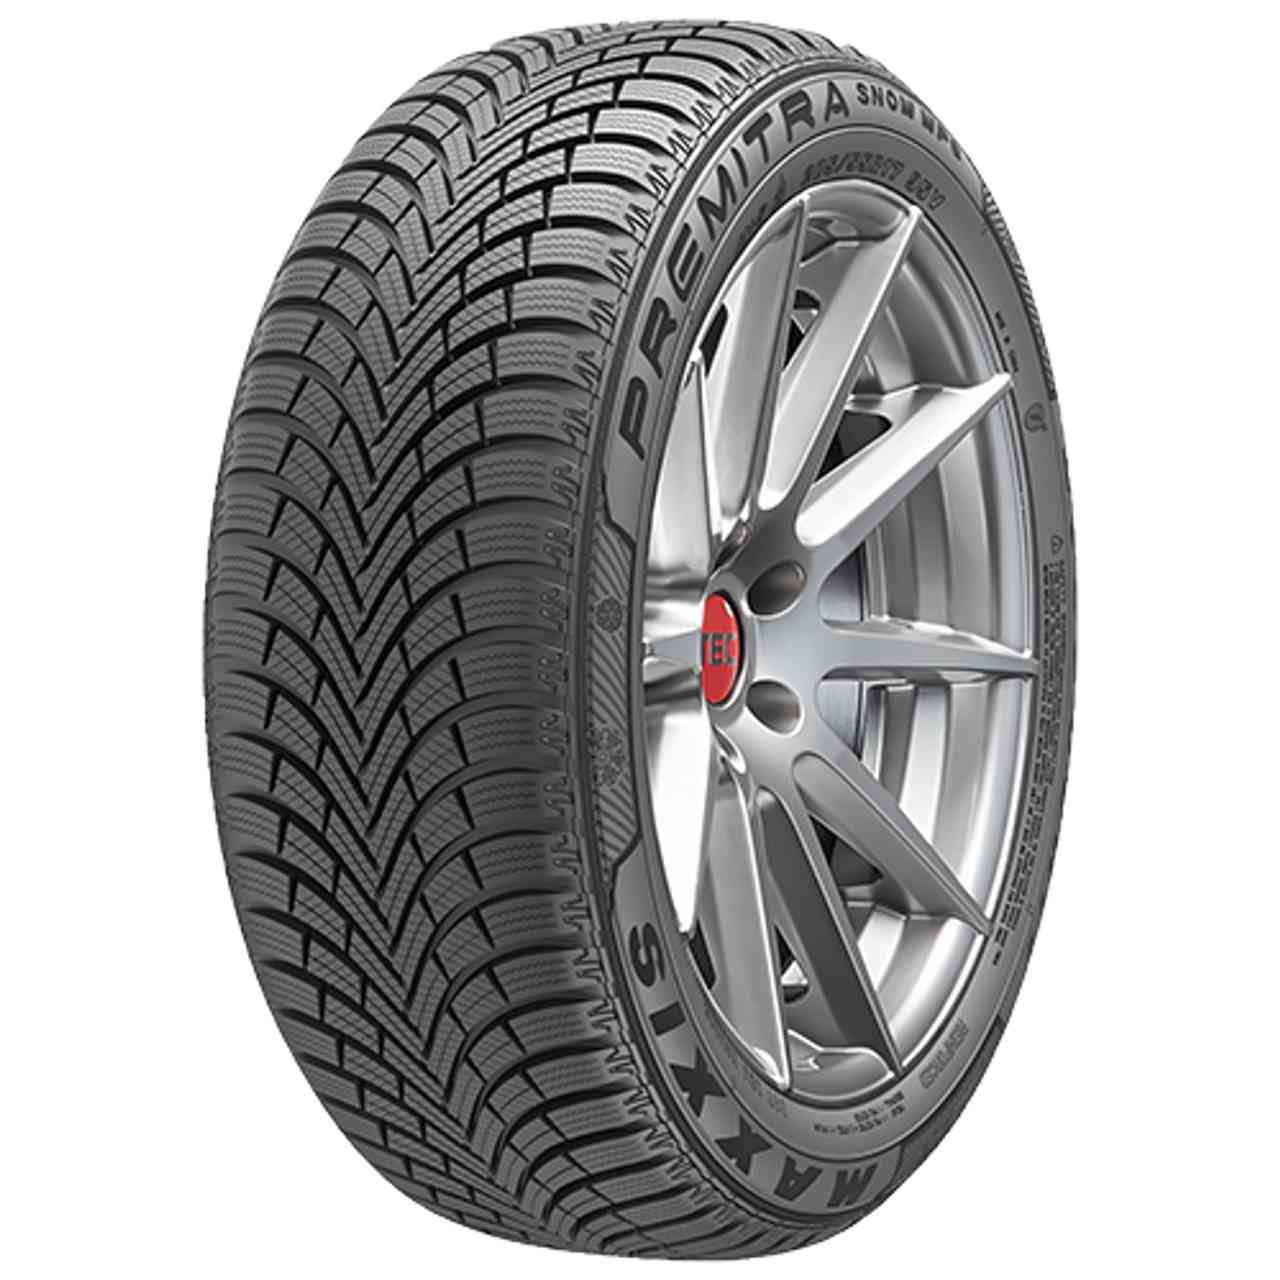 MAXXIS PREMITRA SNOW WP6 225/40R18 92V BSW von MAXXIS